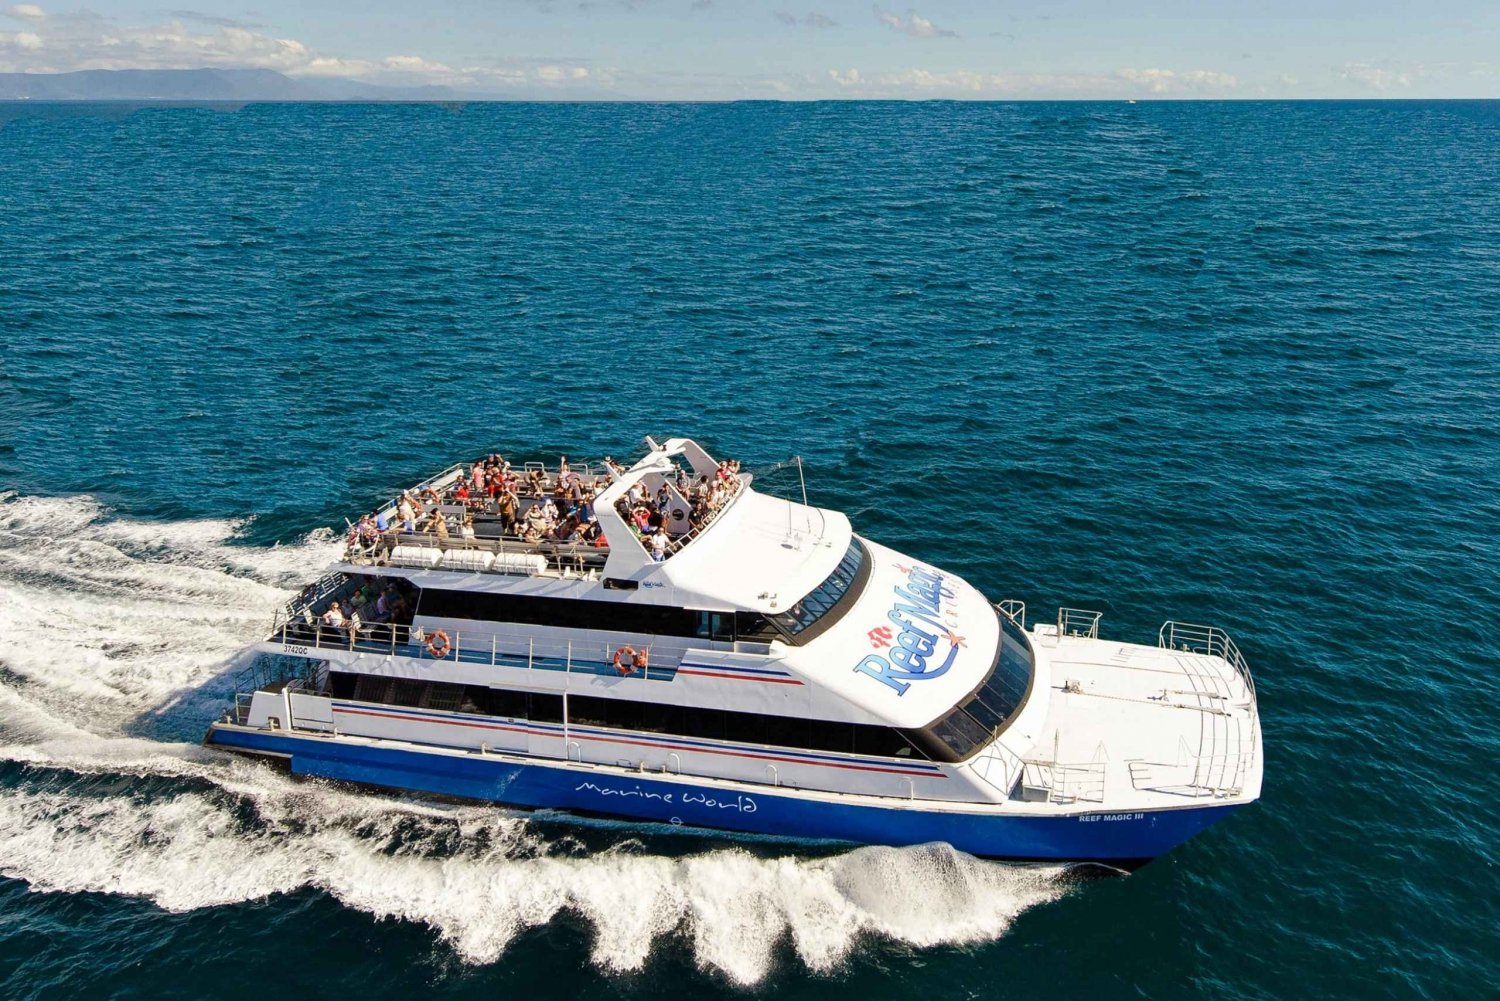 Cairns: Great Barrier Reef Cruise with Water Activities